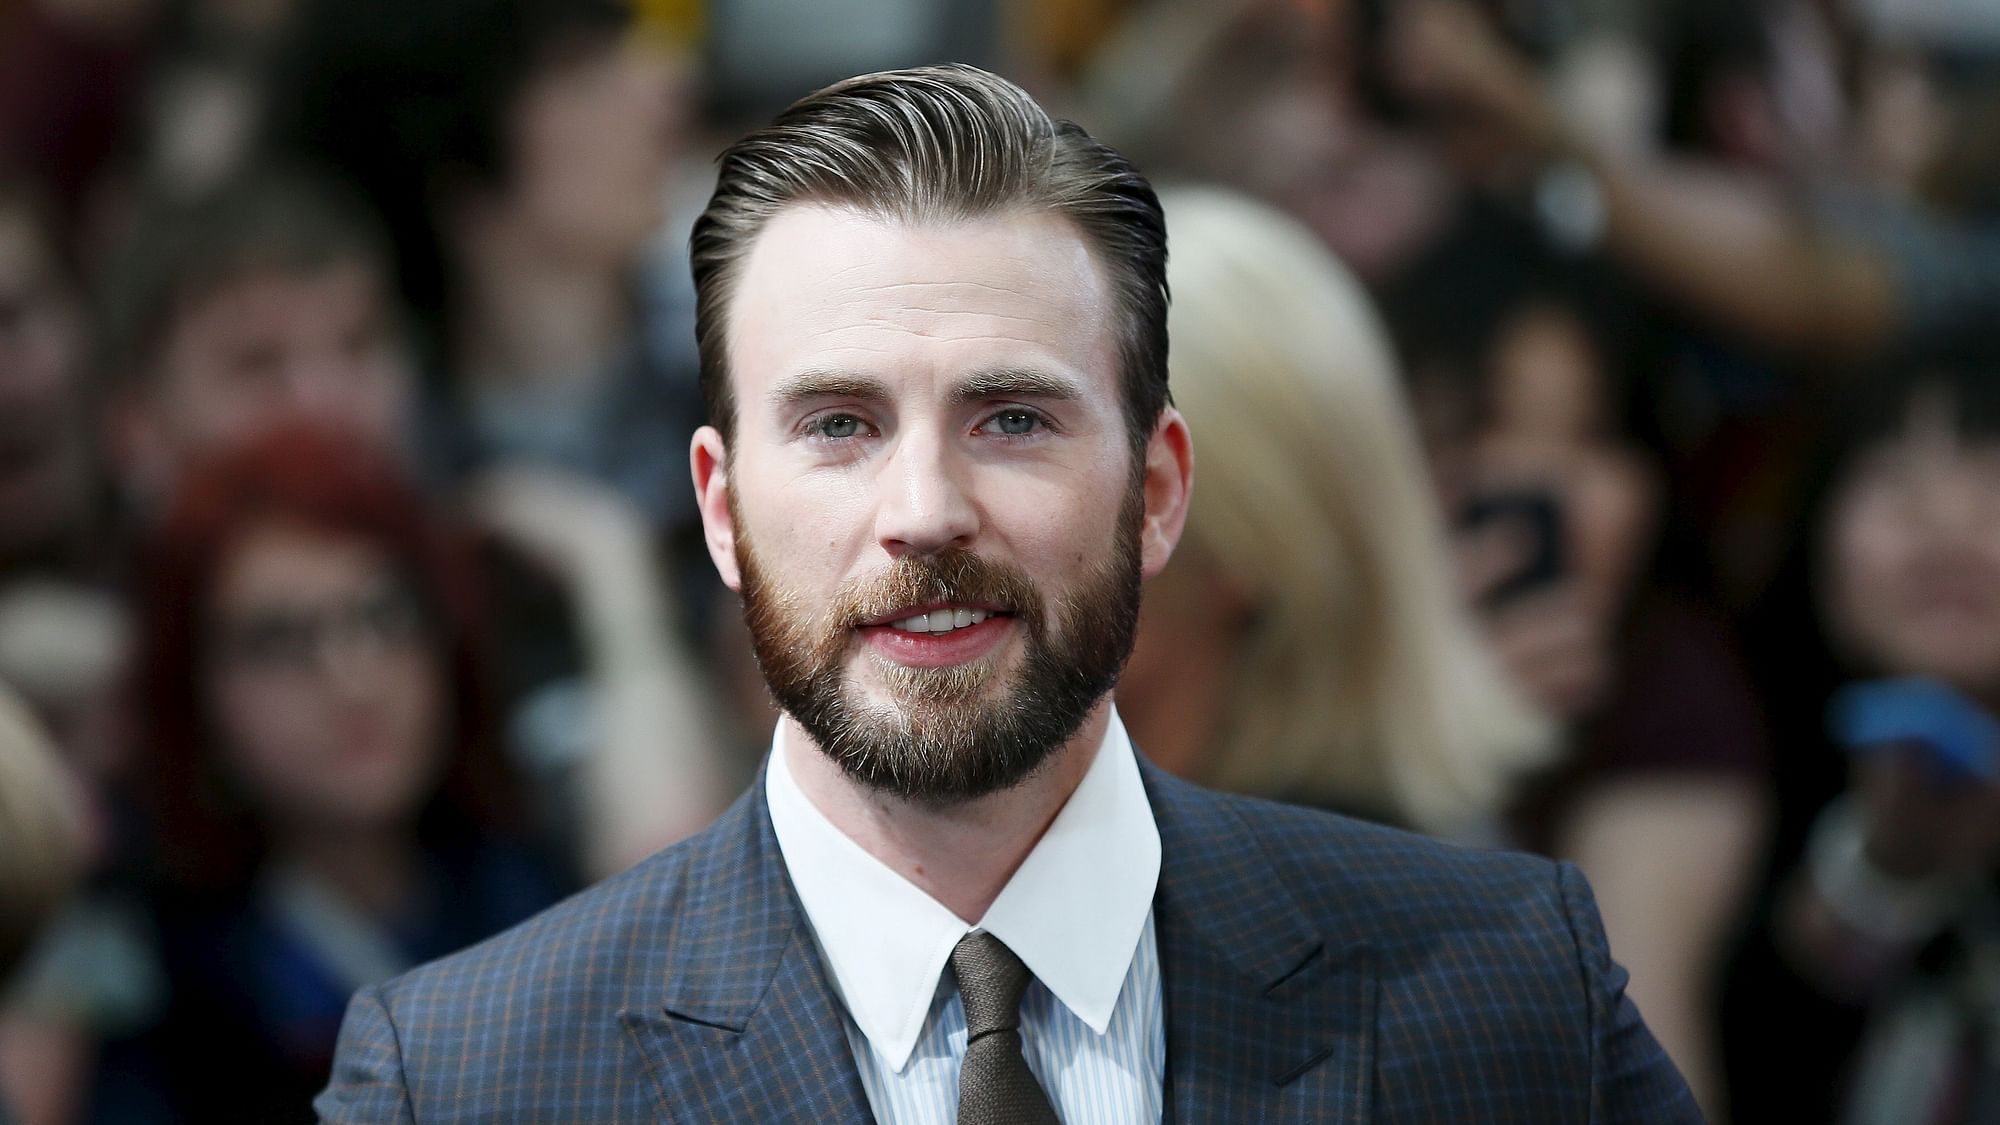 Chris Evans became a topic of discussion on Twitter after he accidentally shared a nude during a game on Instagram.